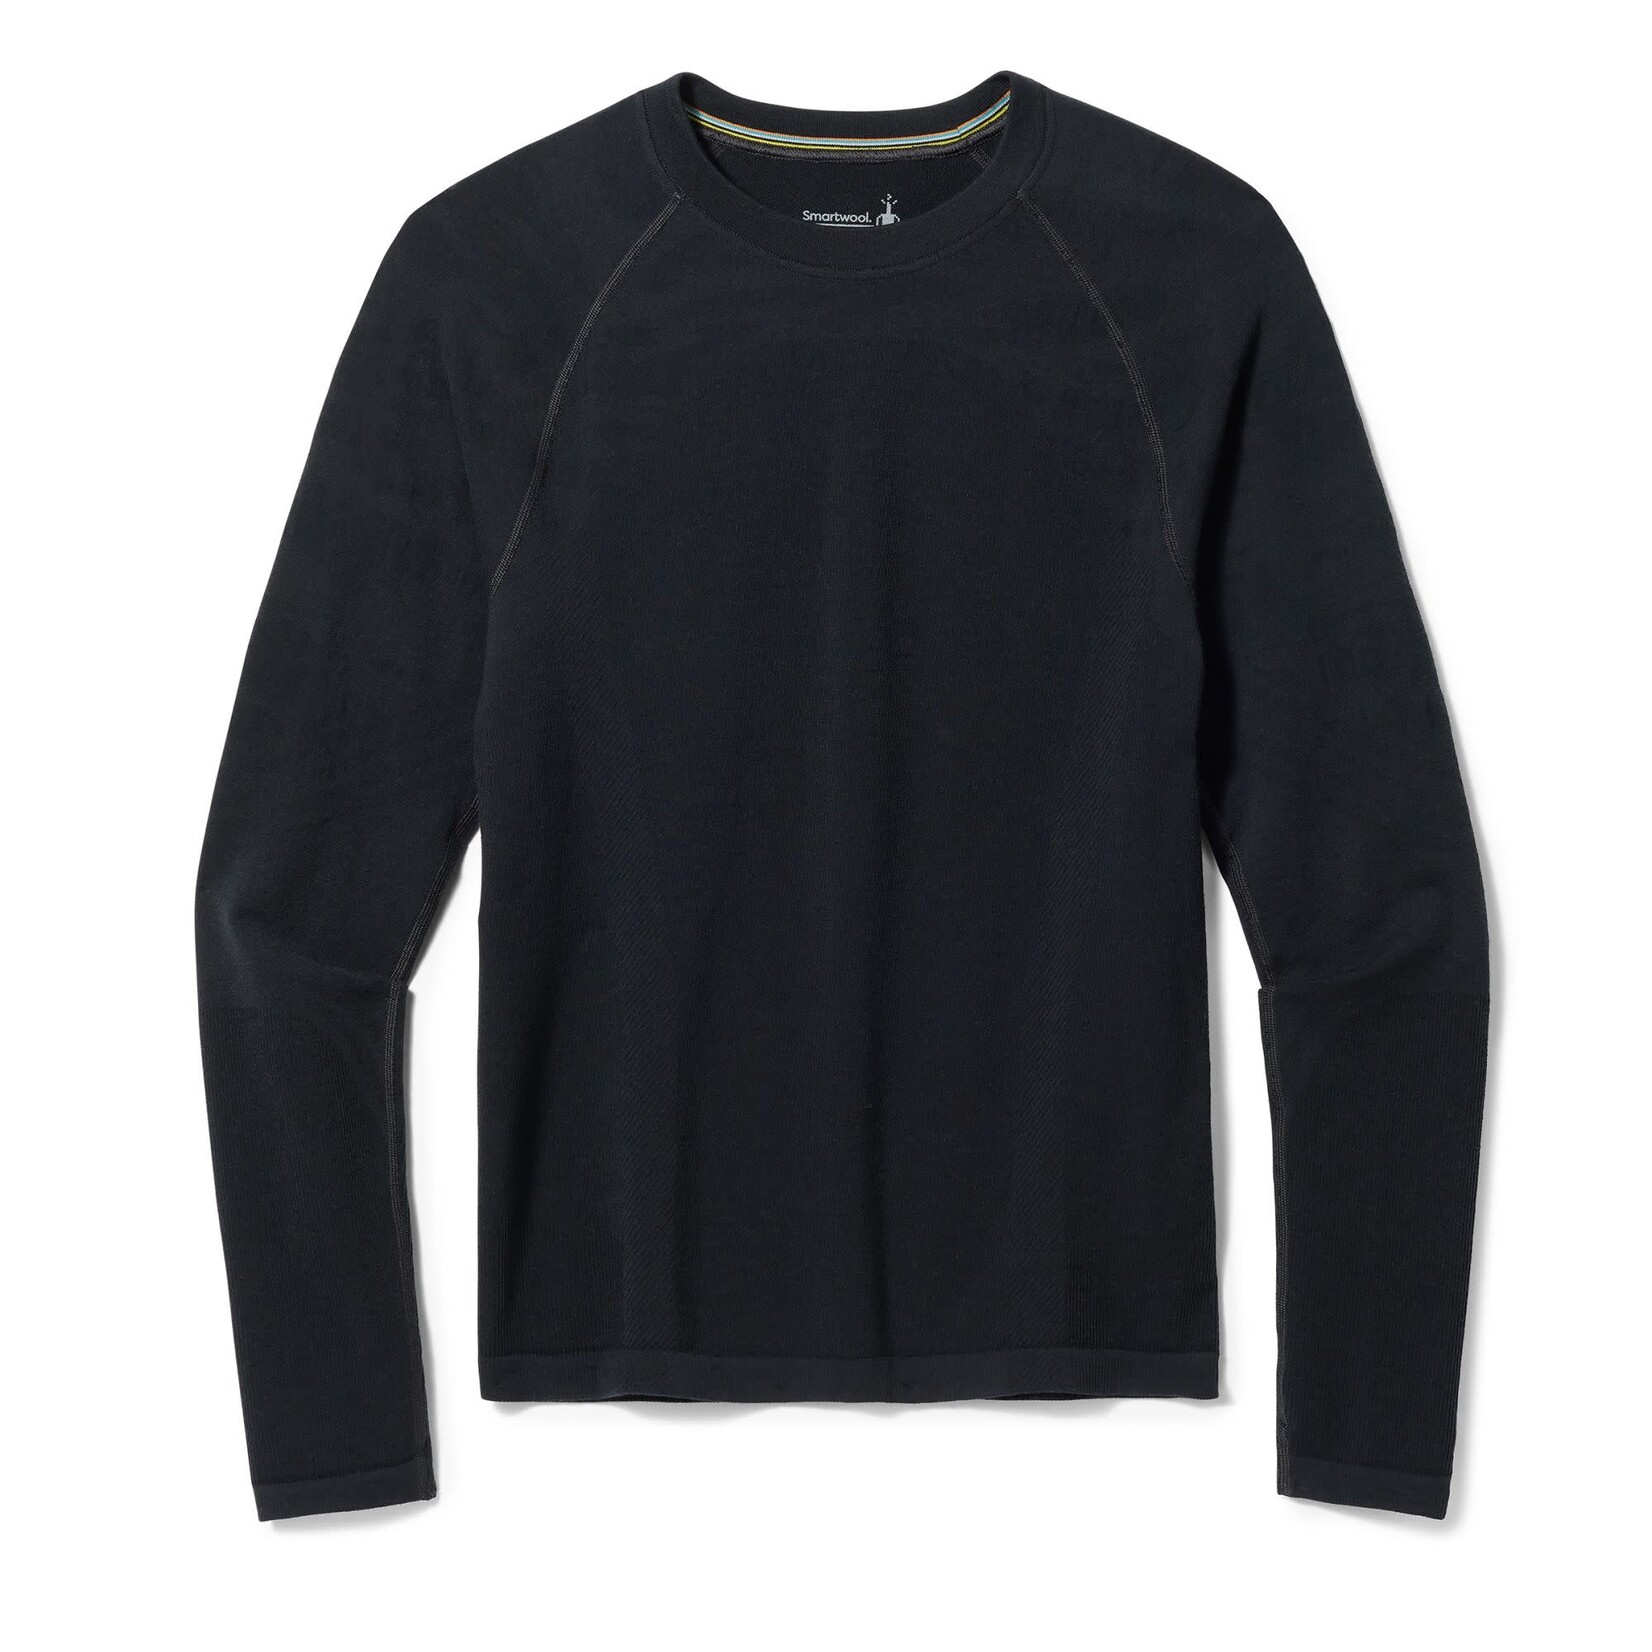 Smartwool Smartwool Intraknit Active Base Layer Long Sleeve M